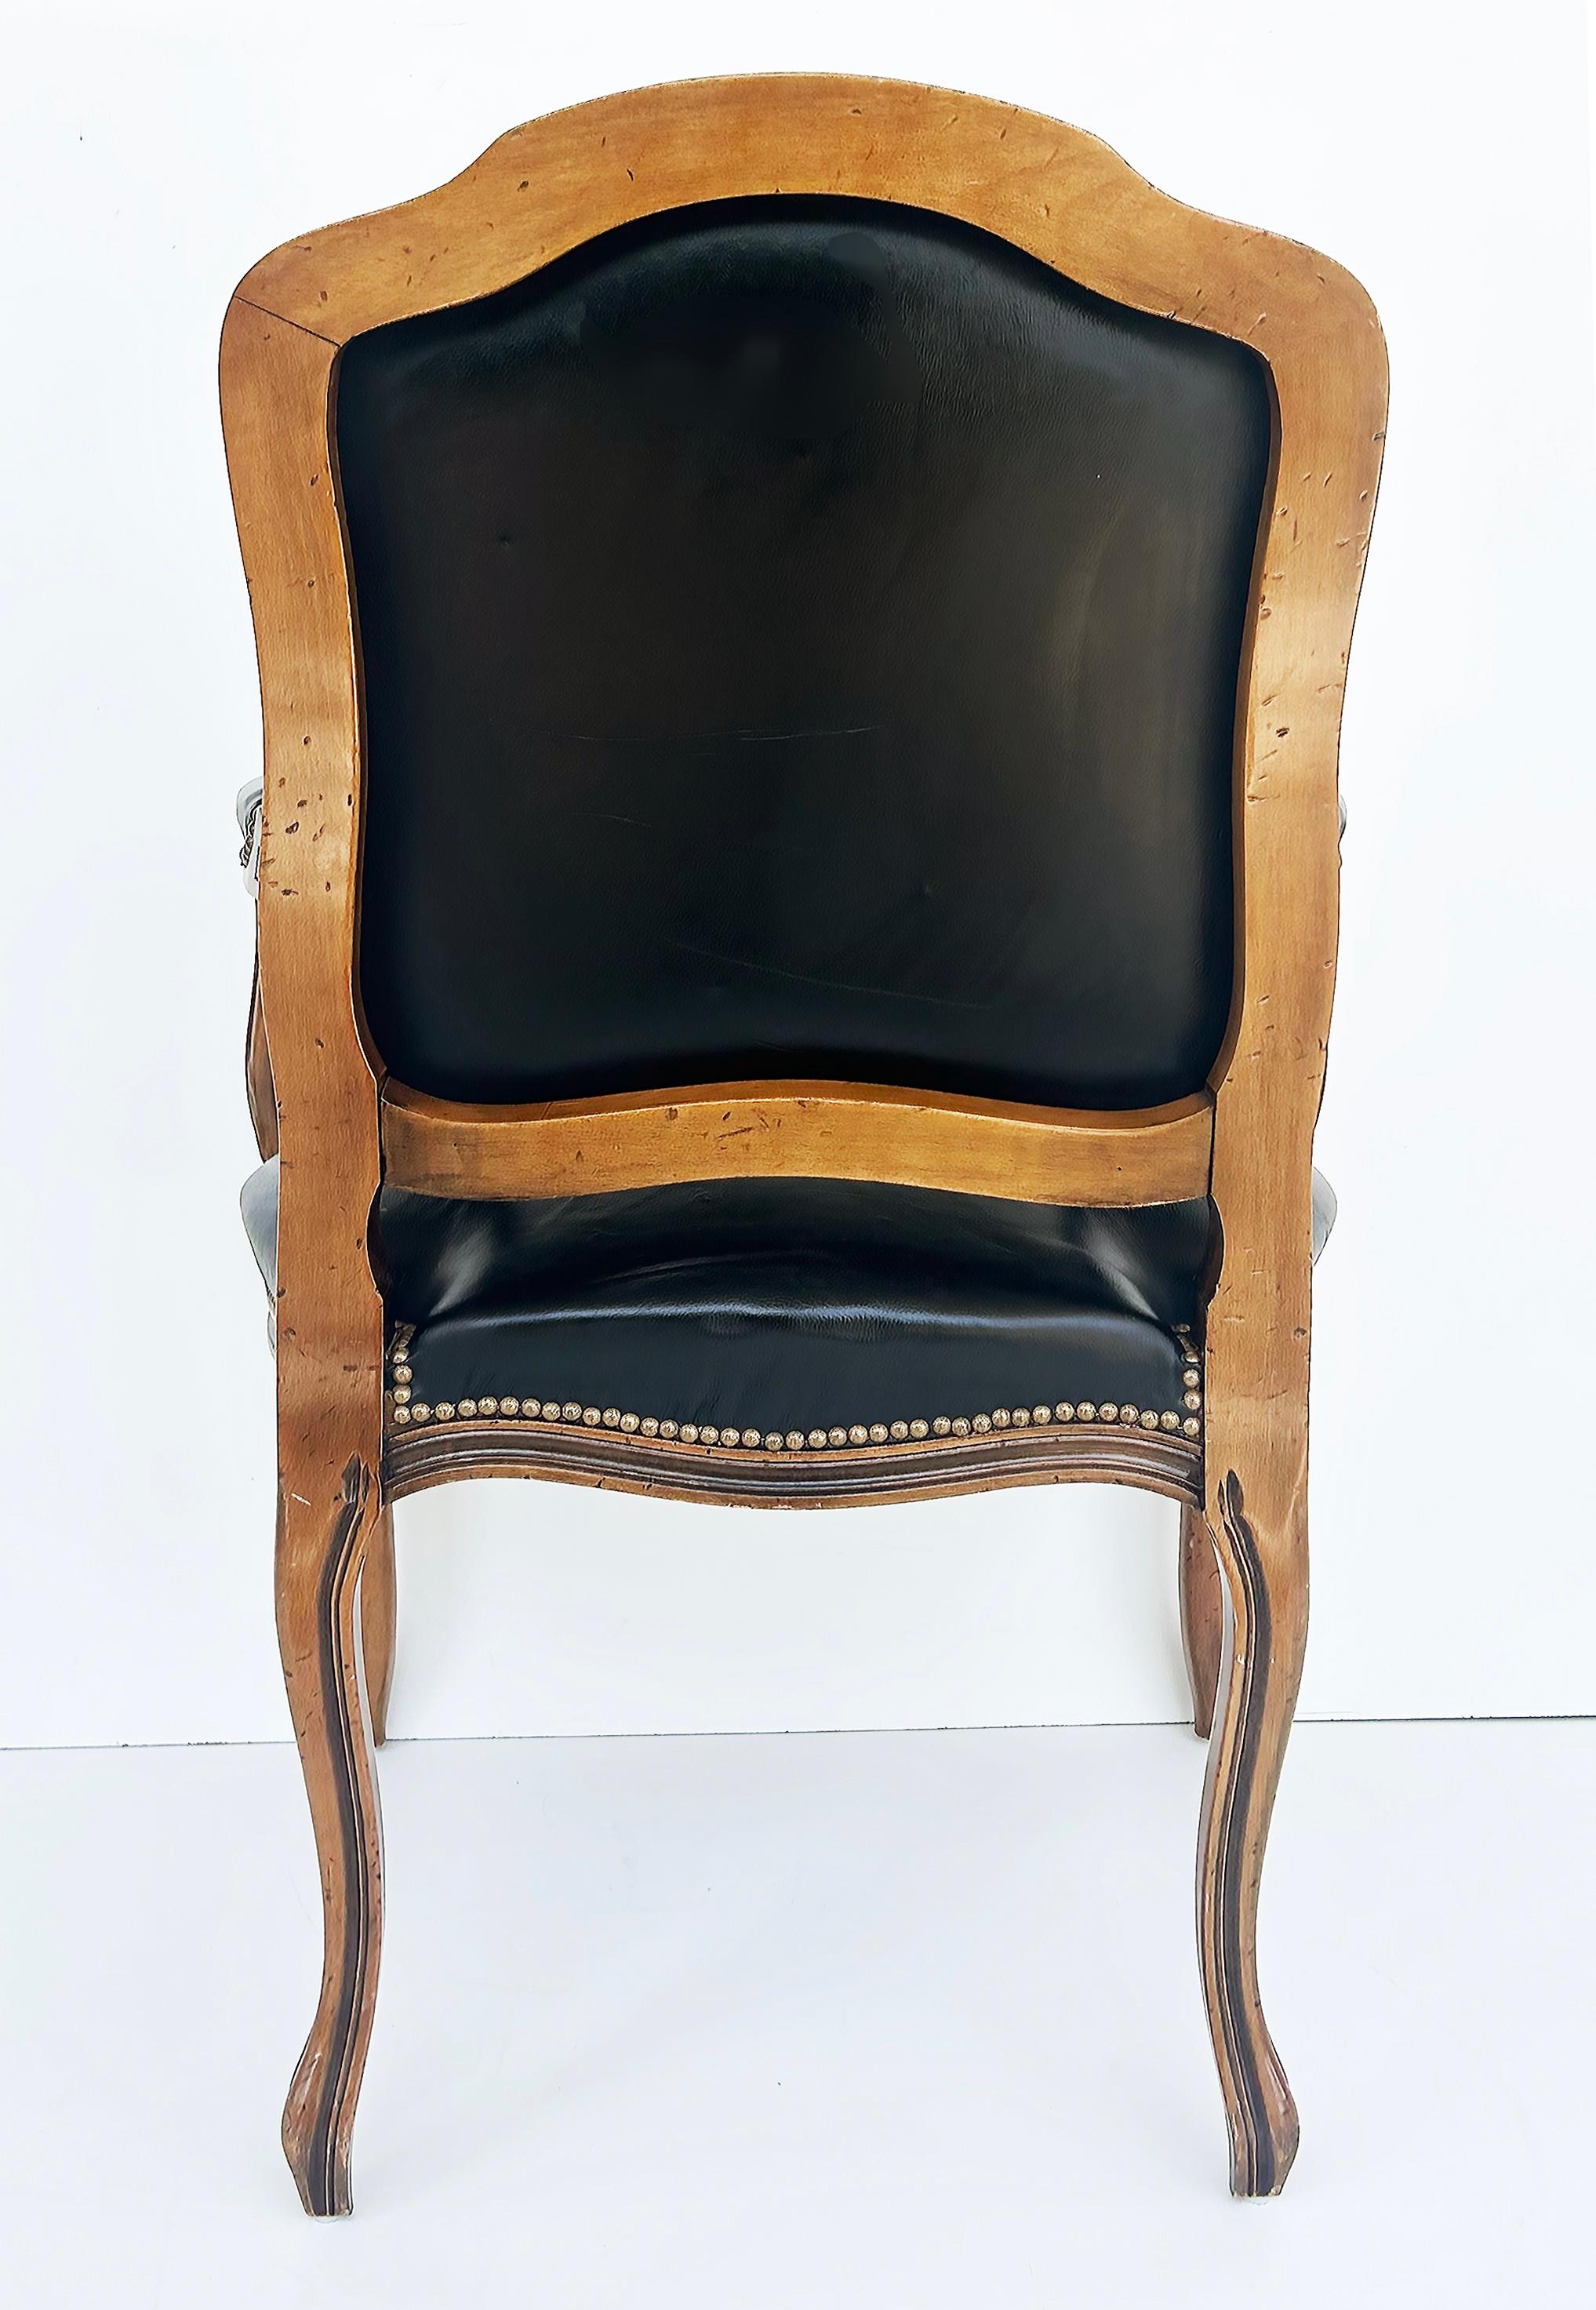 Vintage Italian Chateau D'Ax Leather Armchairs with Brass Nailhead Details, Pair For Sale 1